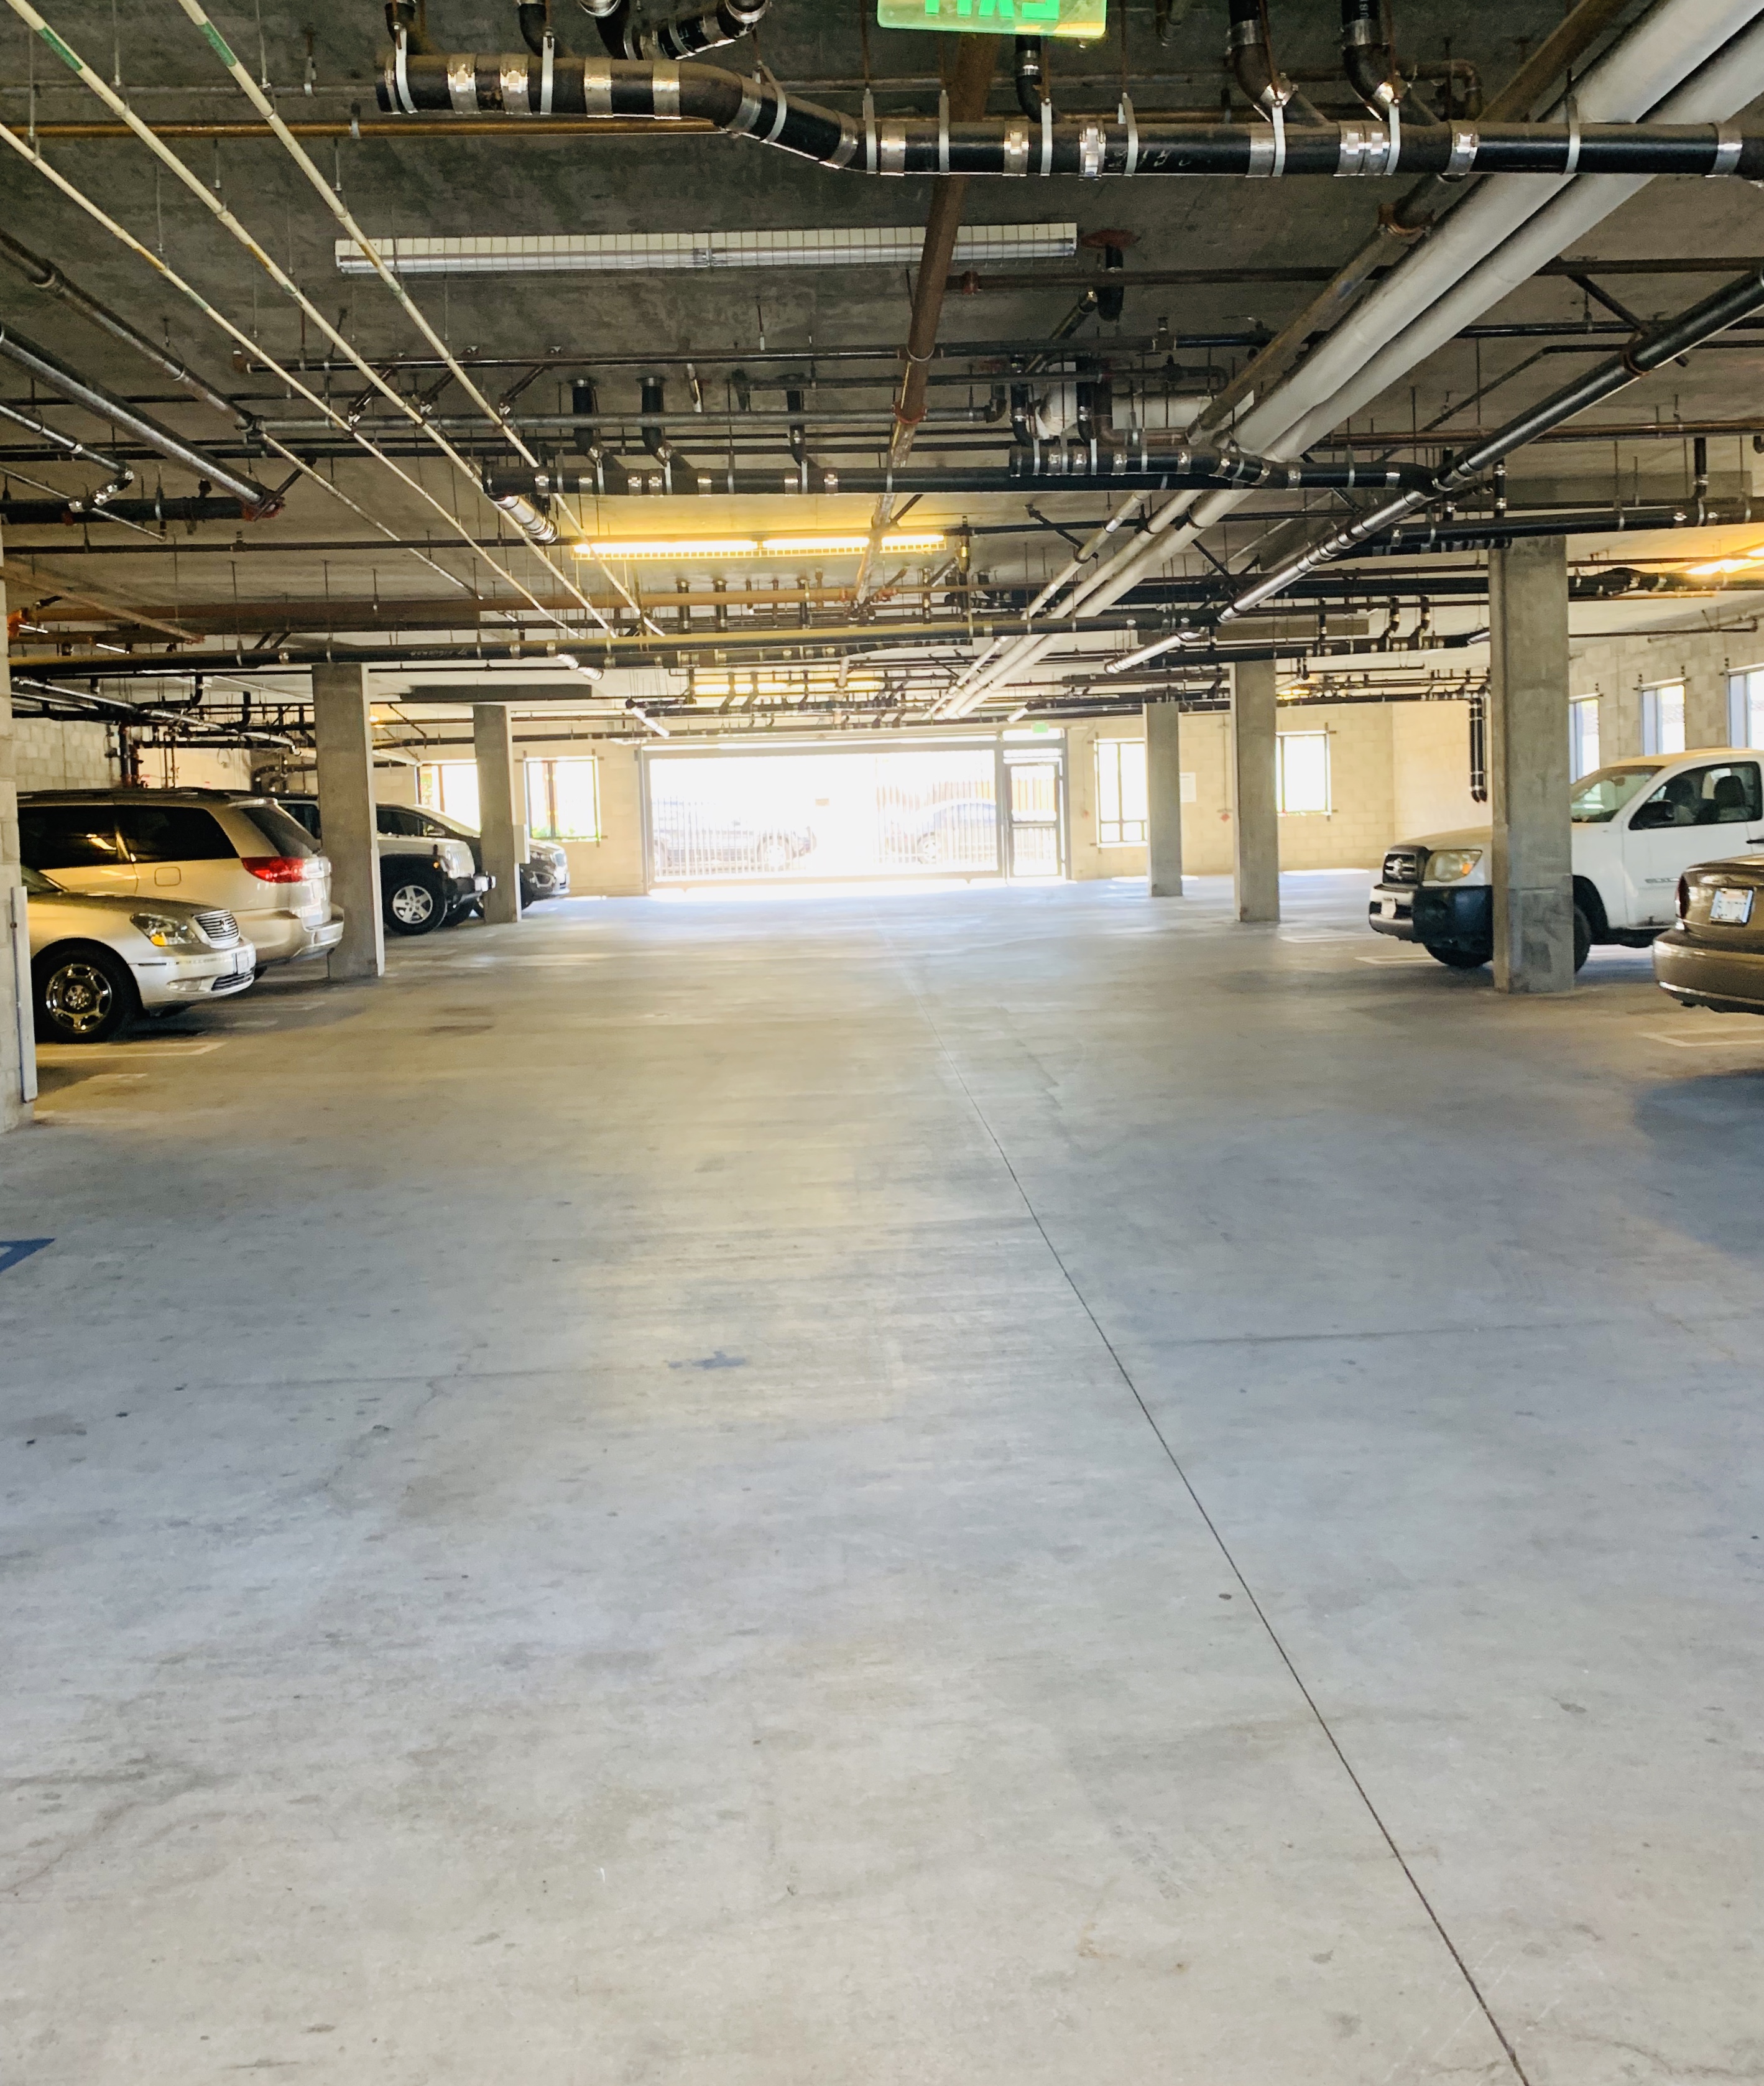 Inside view of a gated parking garage. Gargae has multiple parking spaces and pipes and lighting on the ceiling.